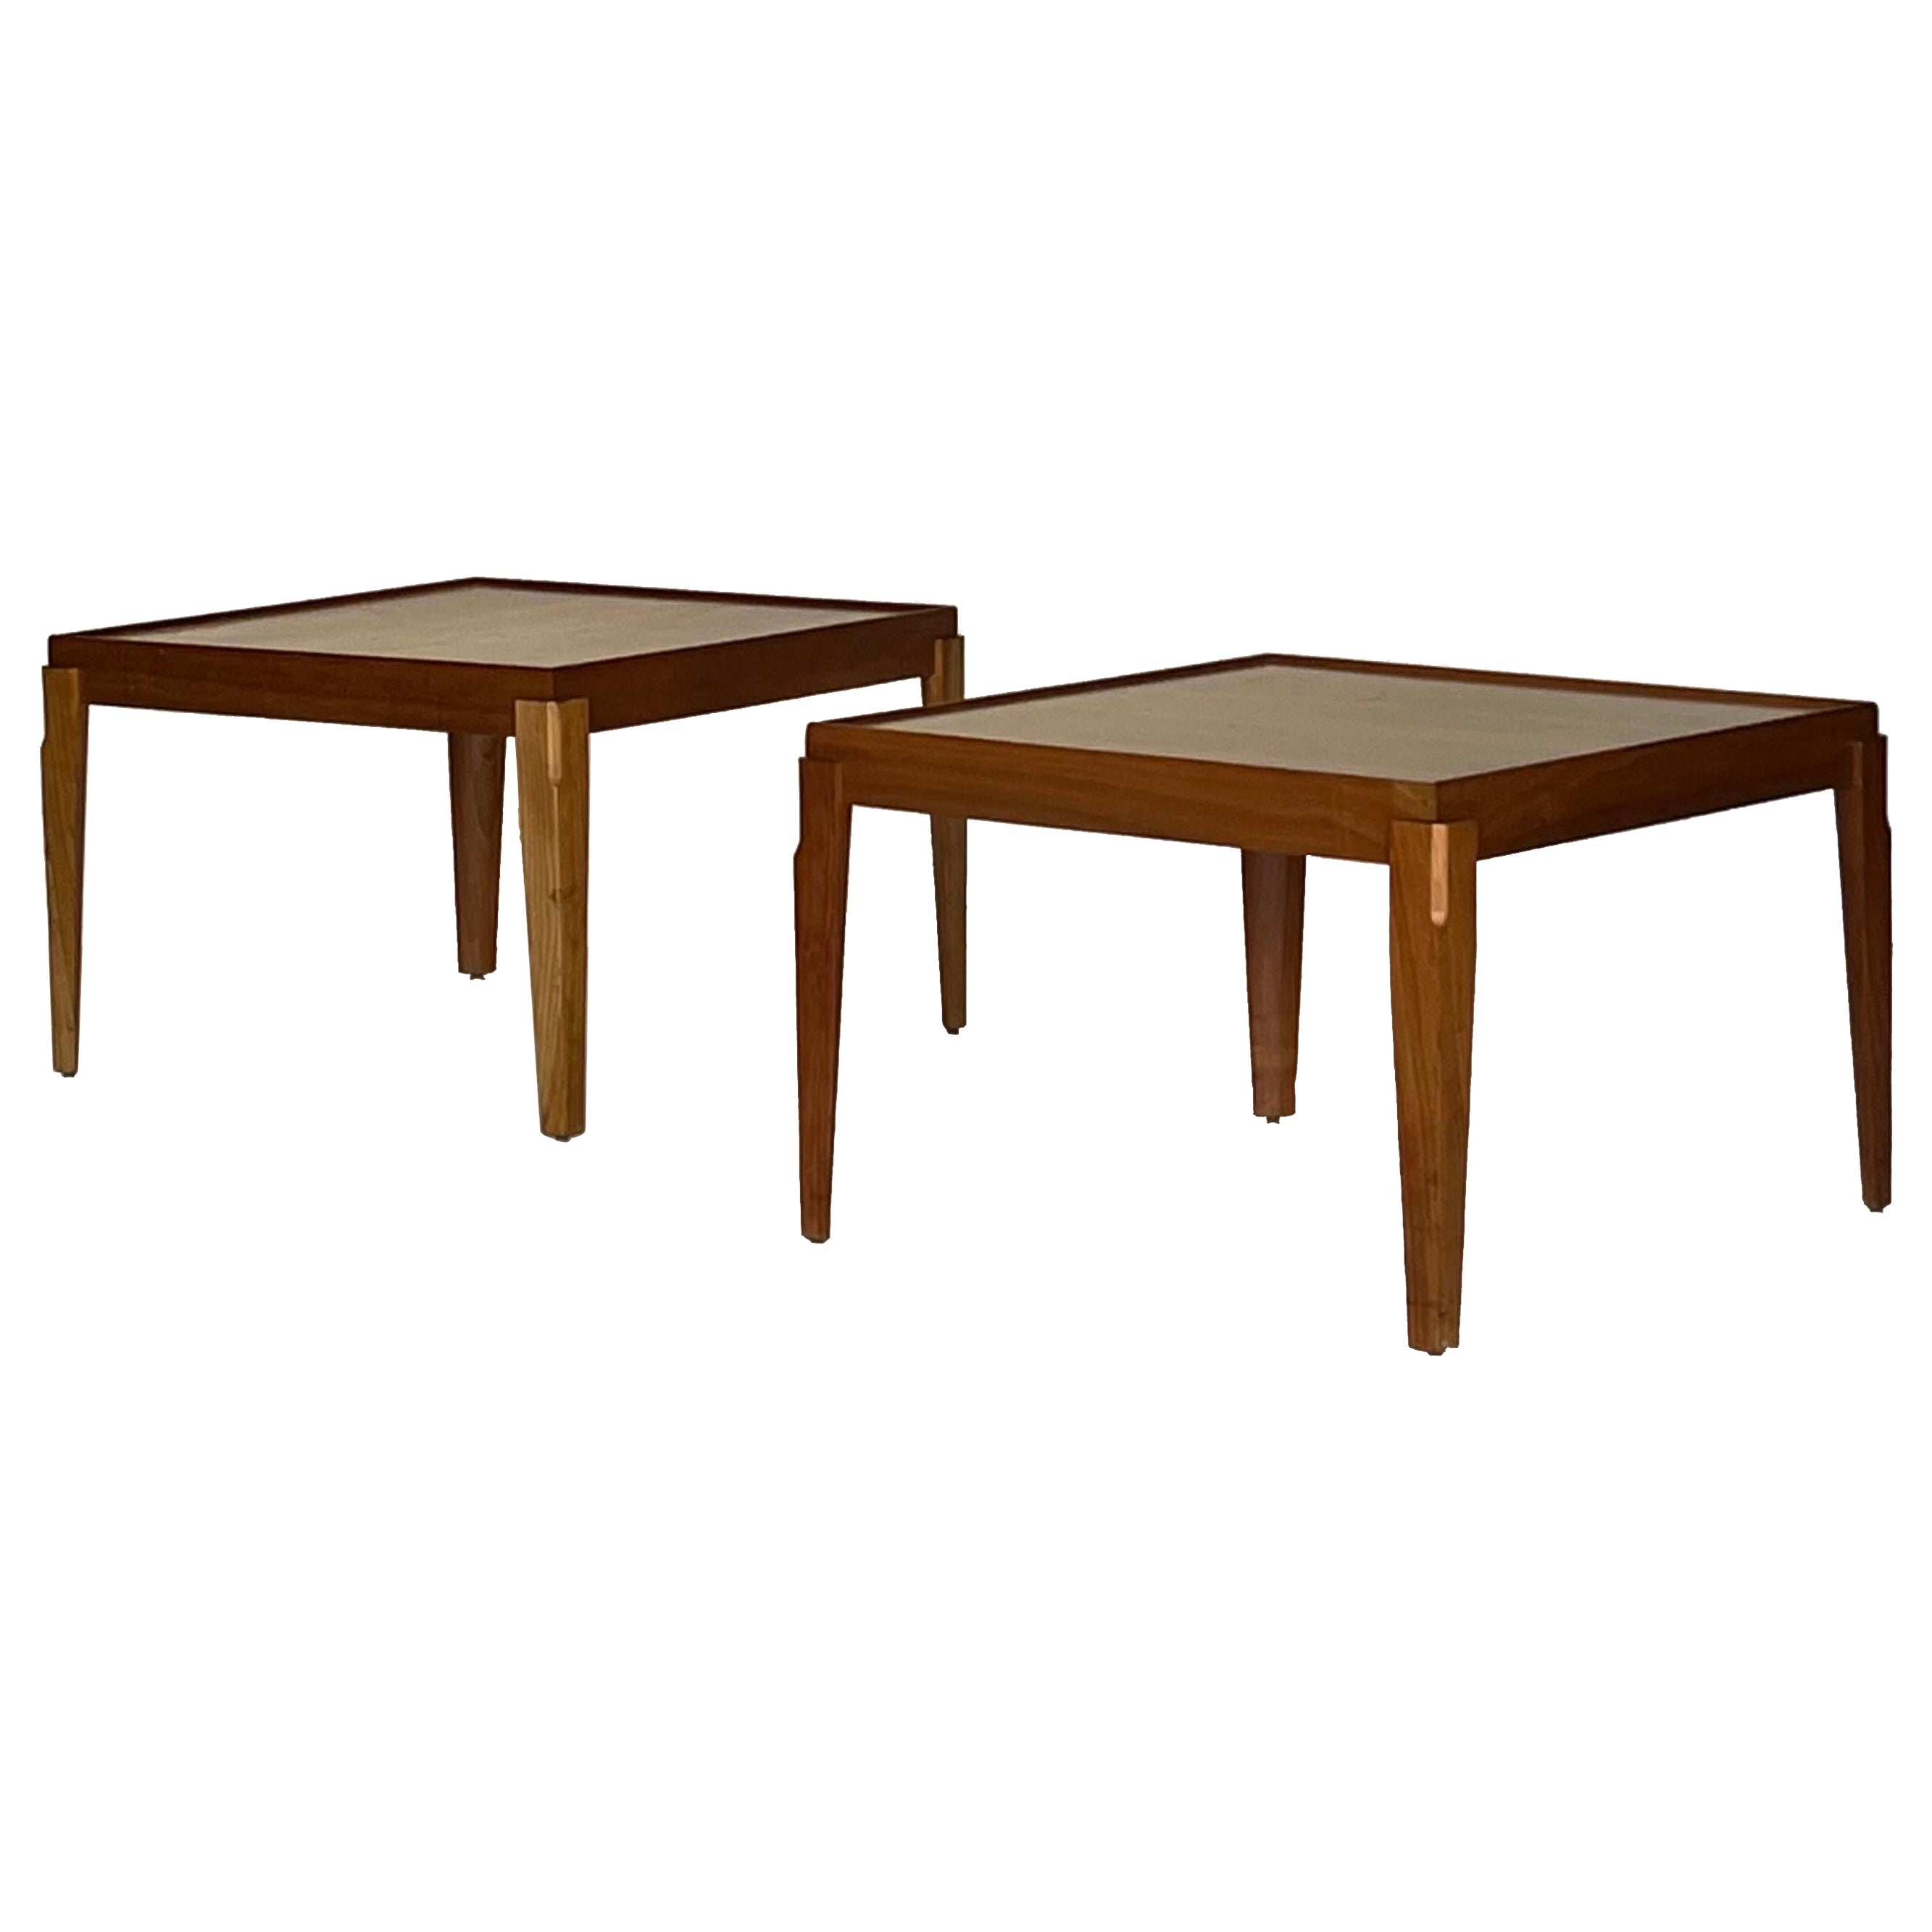 Pair of Chic Italian Blond Ash End Tables in the Style of Gio Ponti